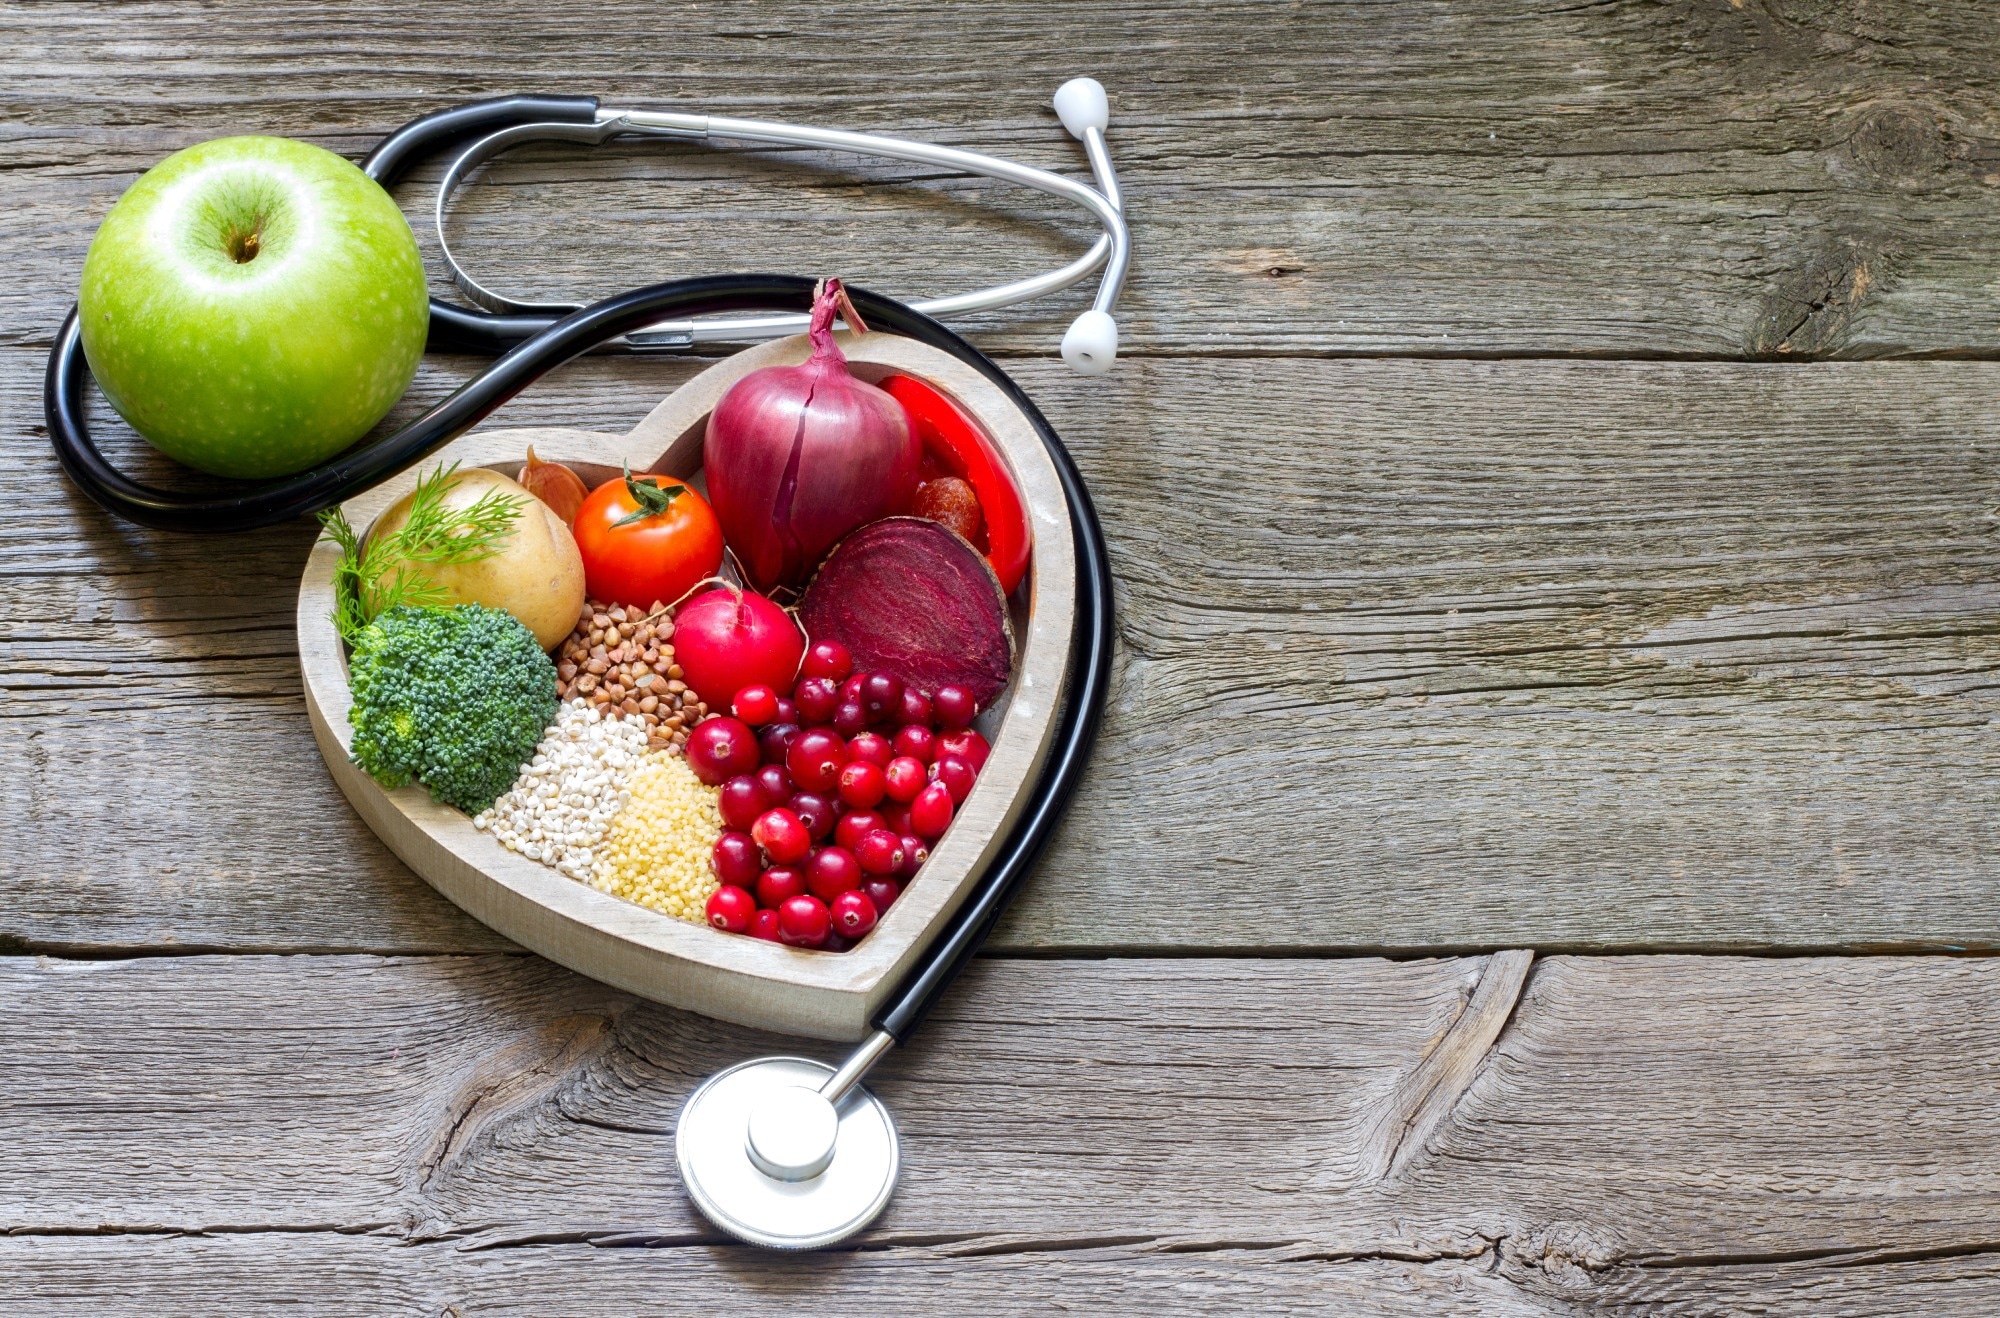 Study: Effects of dietary intervention on human diseases: molecular mechanisms and therapeutic potential. Image Credit: udra11/Shutterstock.com